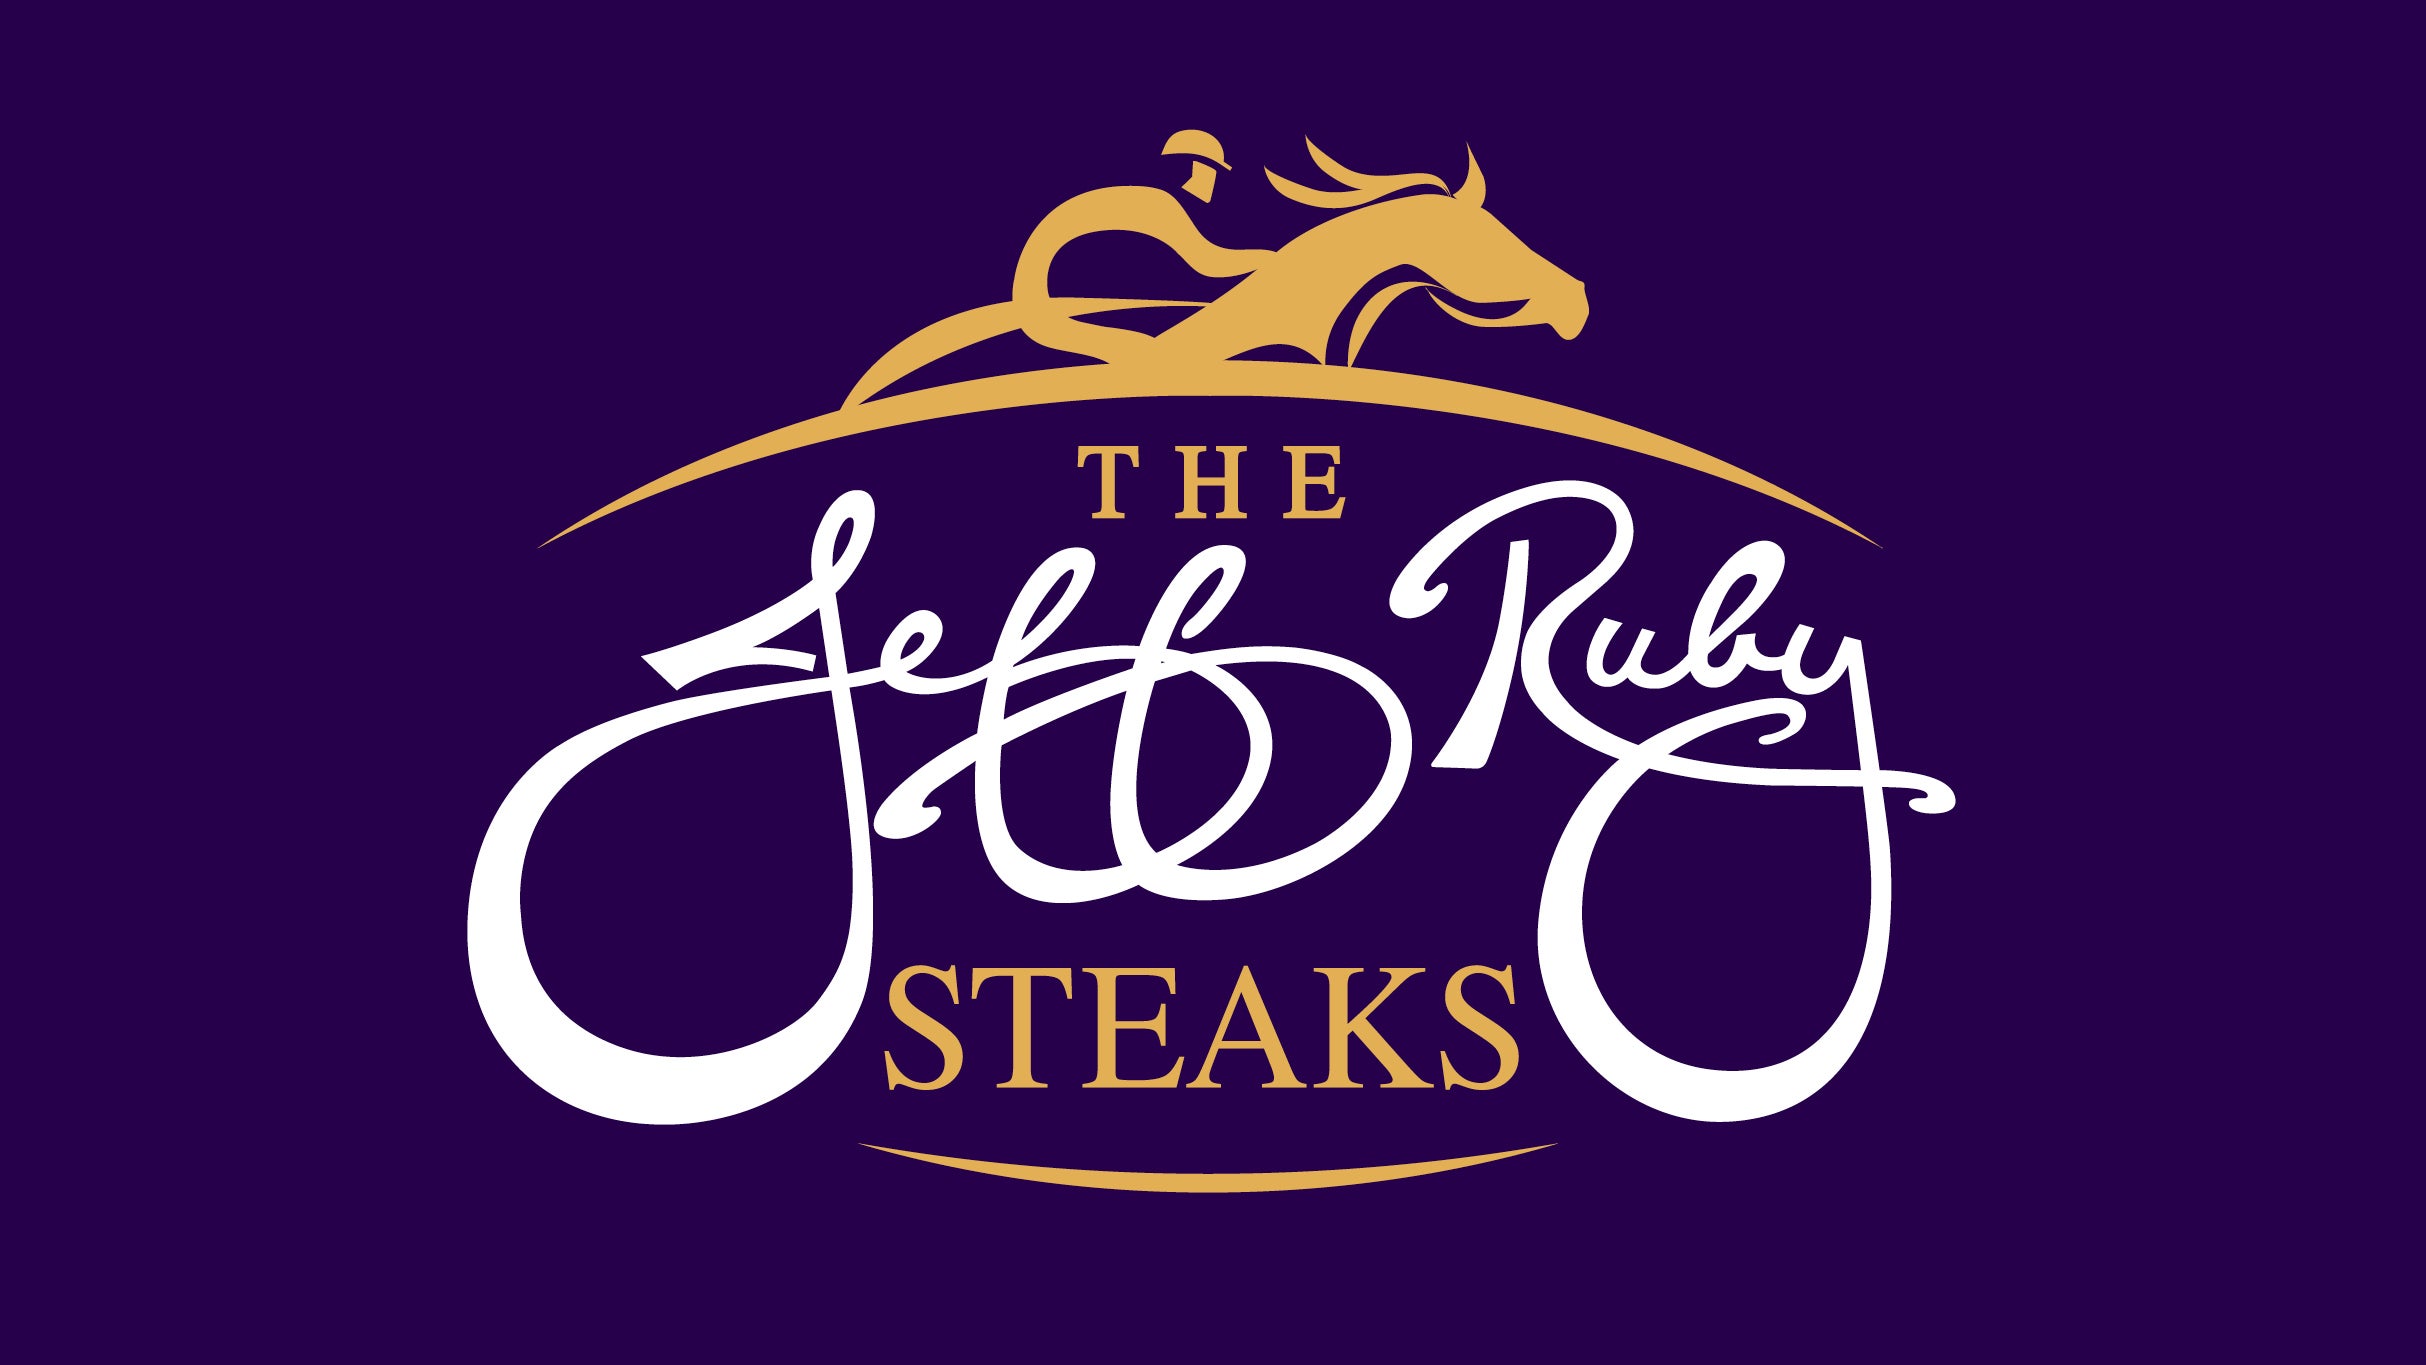 Jeff Ruby Steaks in Florence promo photo for Players Club VIP Experience Promo presale offer code